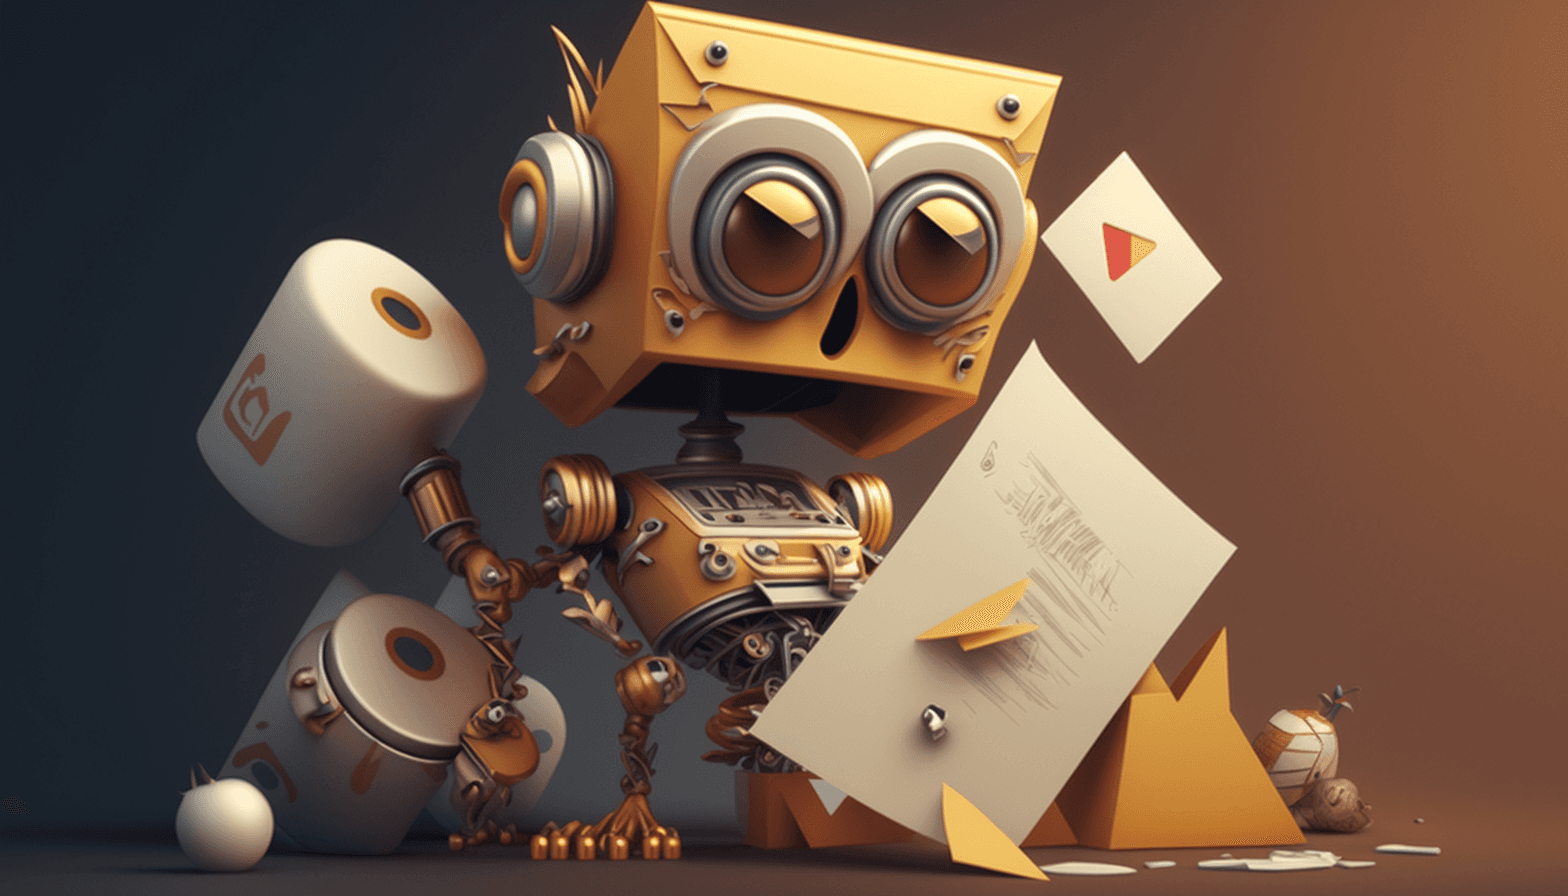 Robot and Letters Illustration